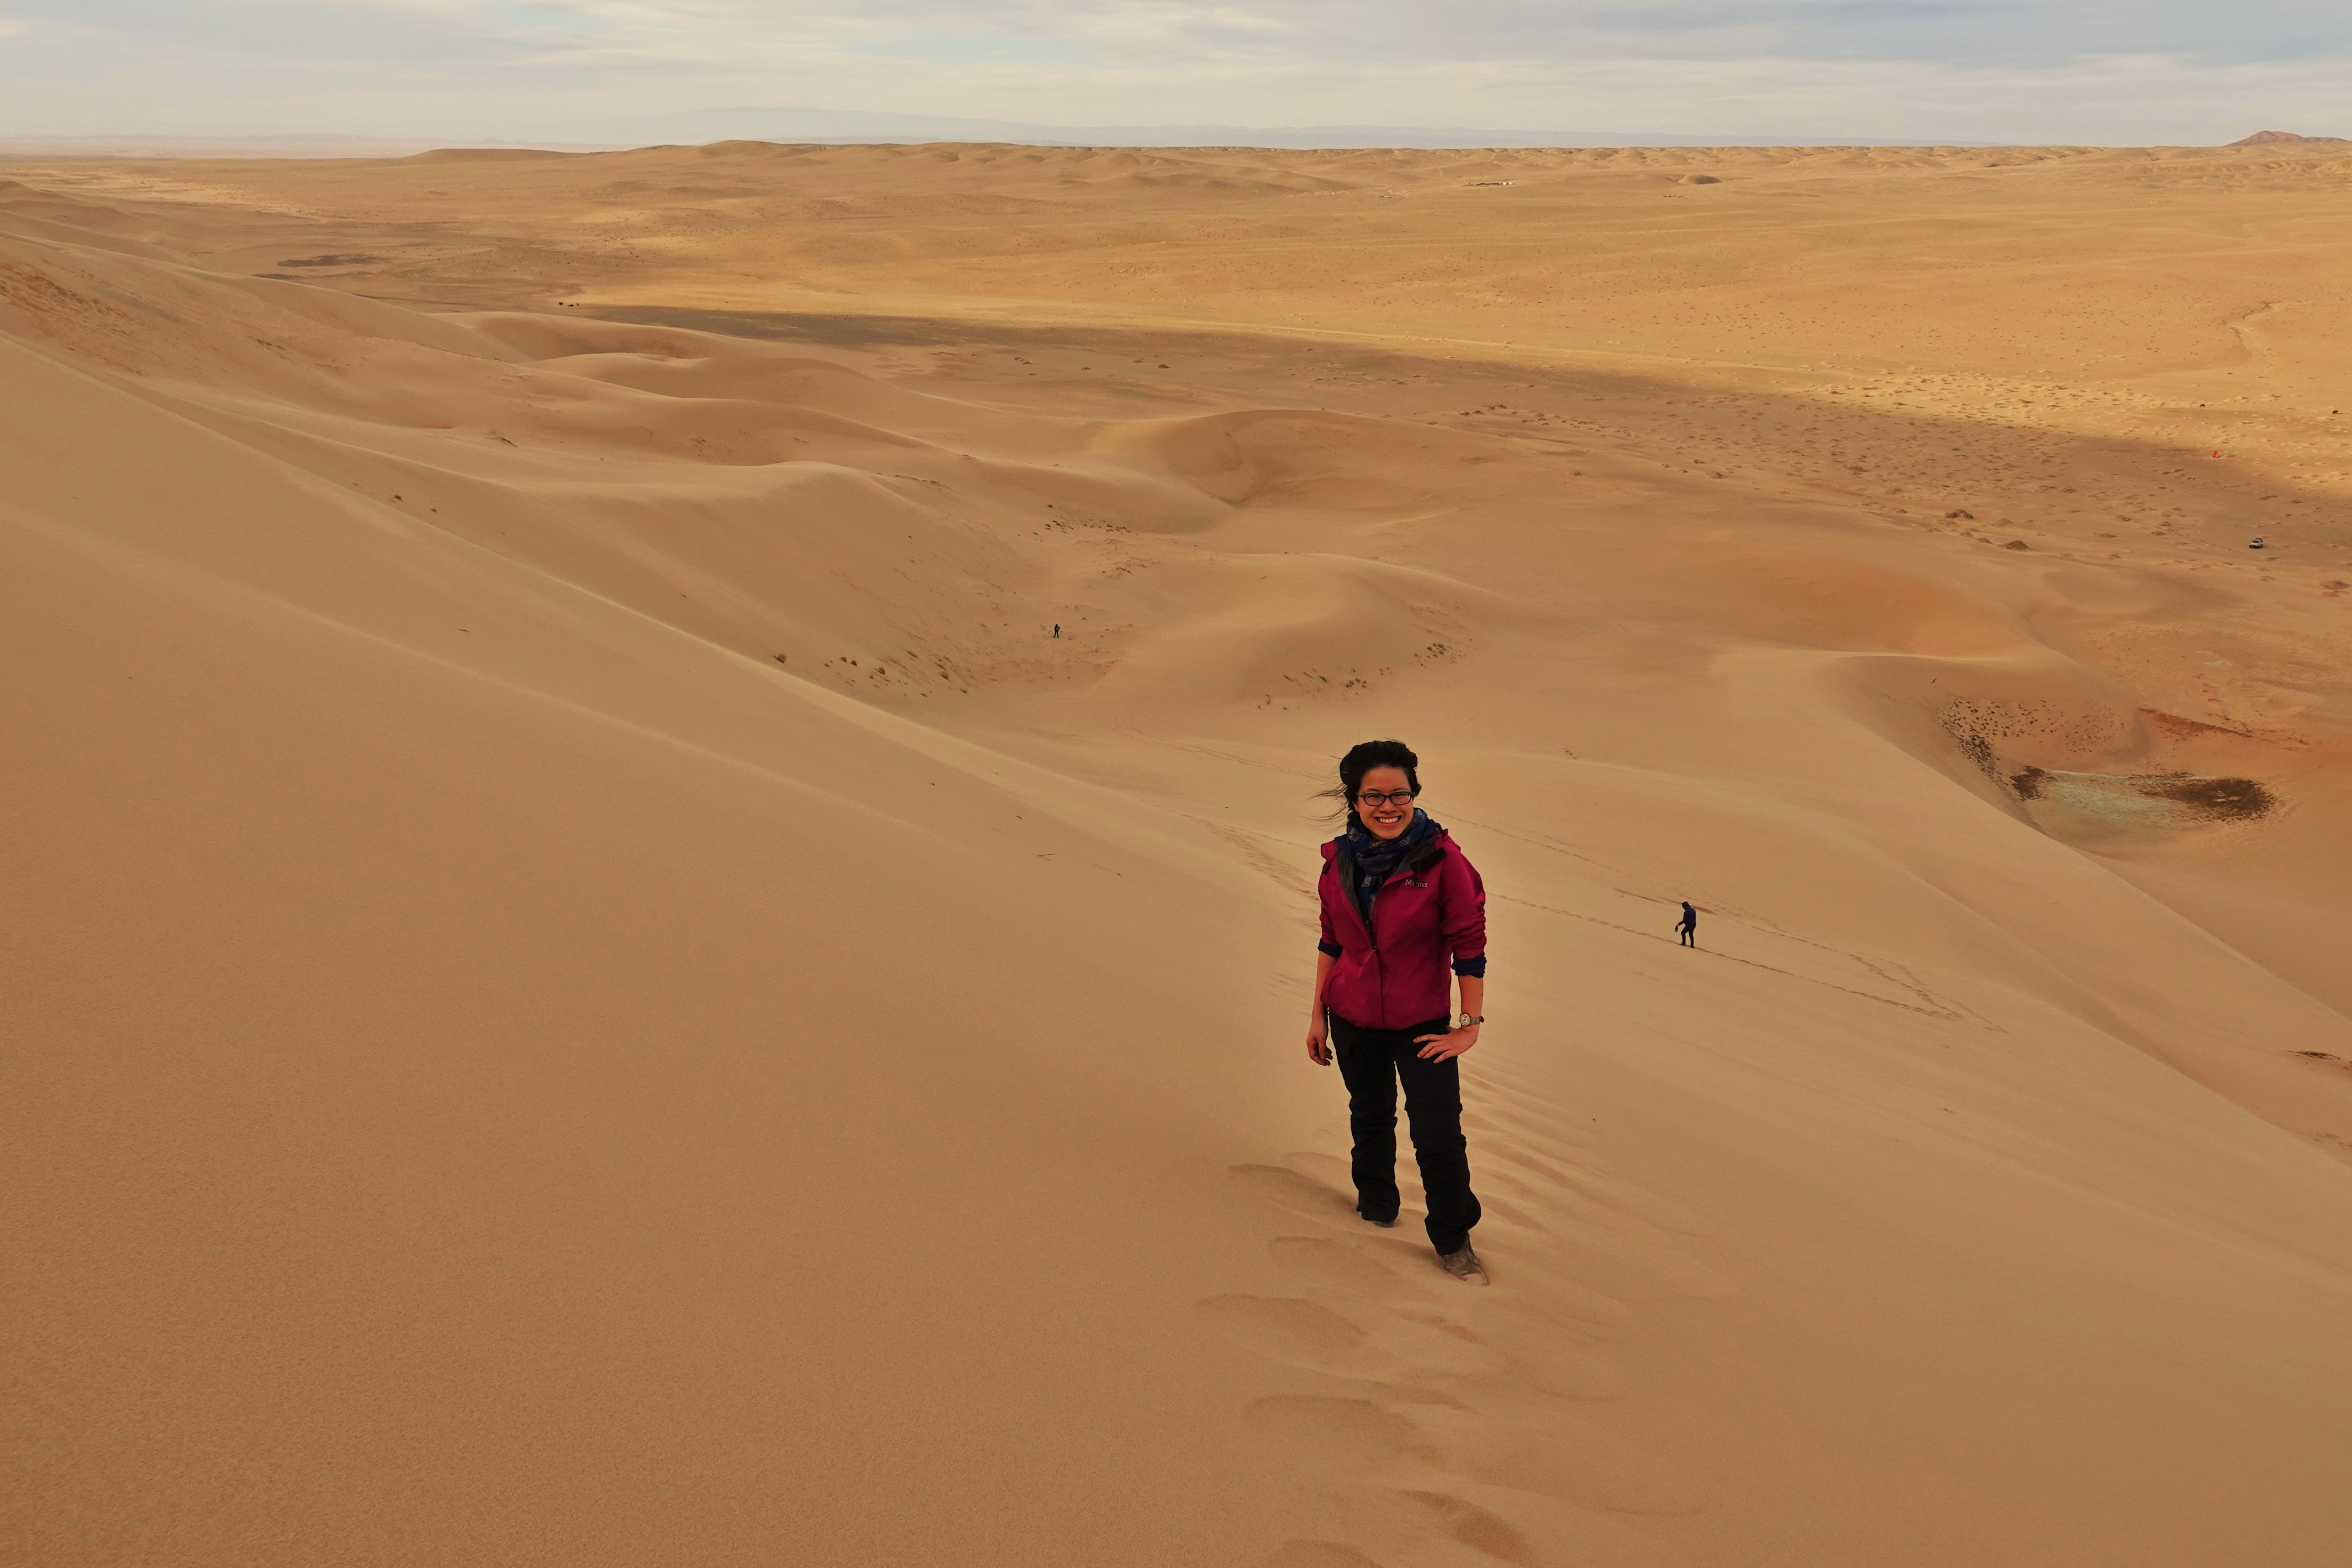 Mongolia's Gobi - Making the Sands Sing, Stone Horse Expeditions